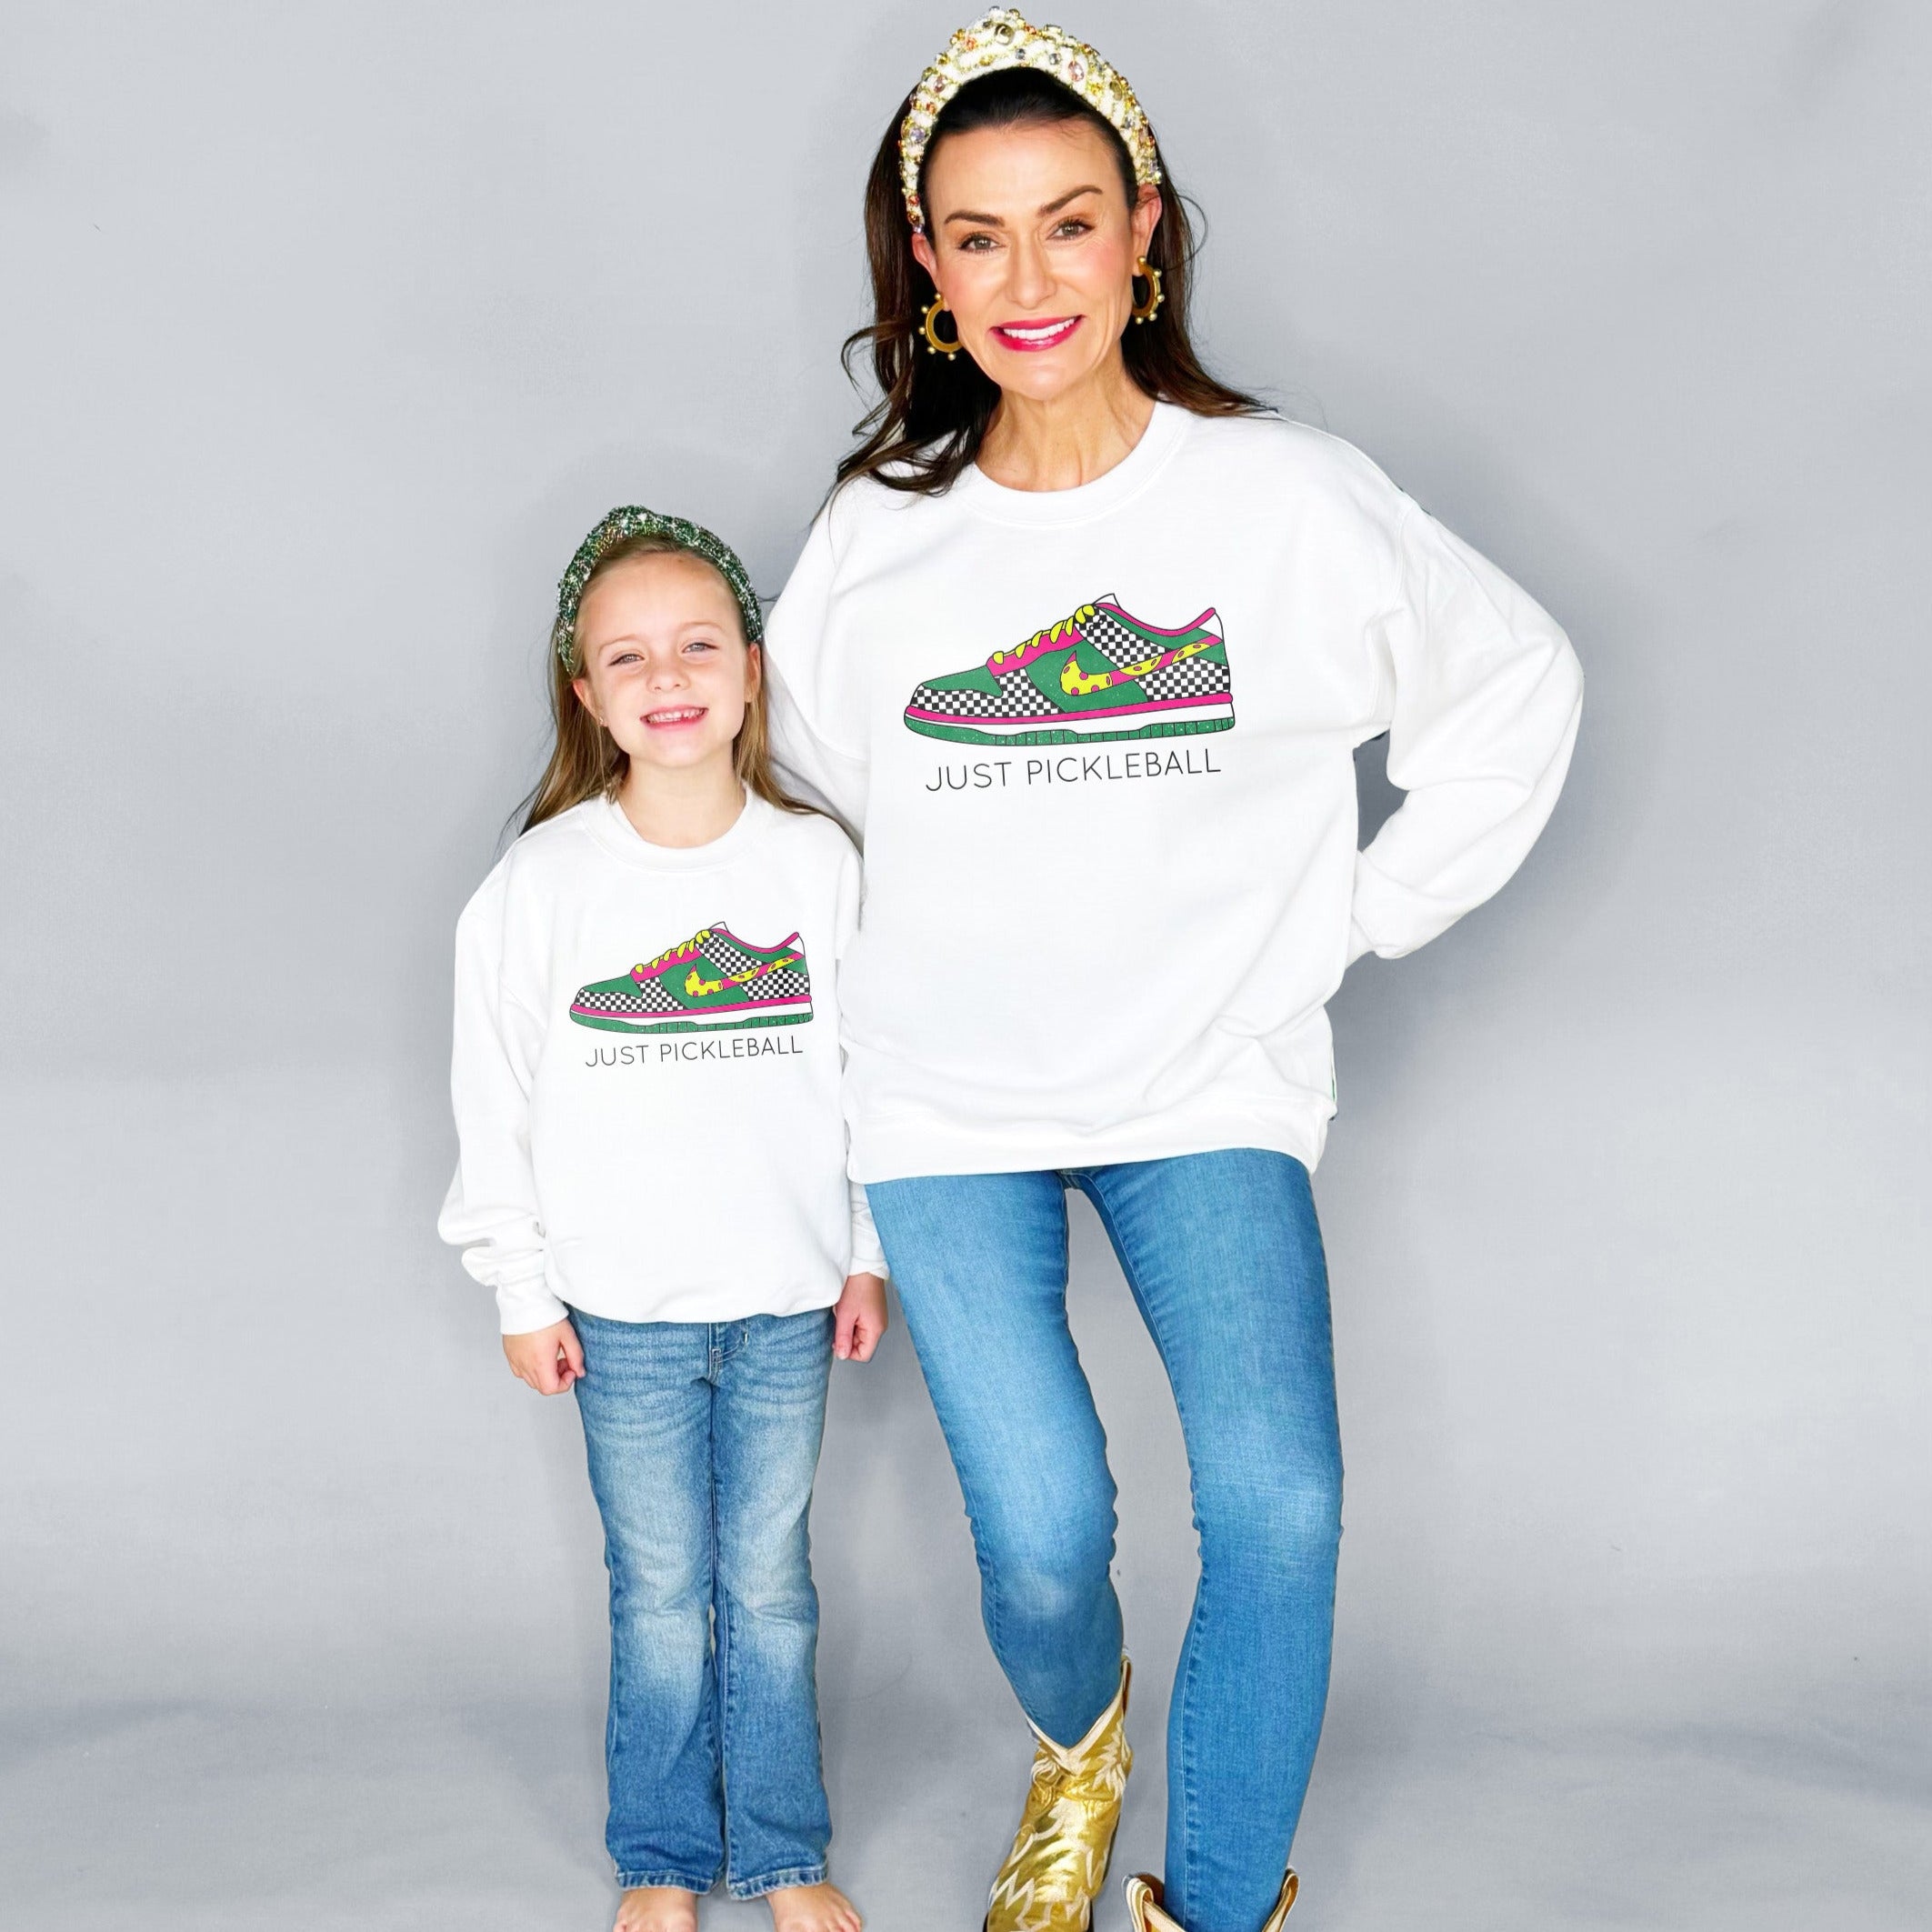 Just Pickleball Youth and Adult Sweatshirt